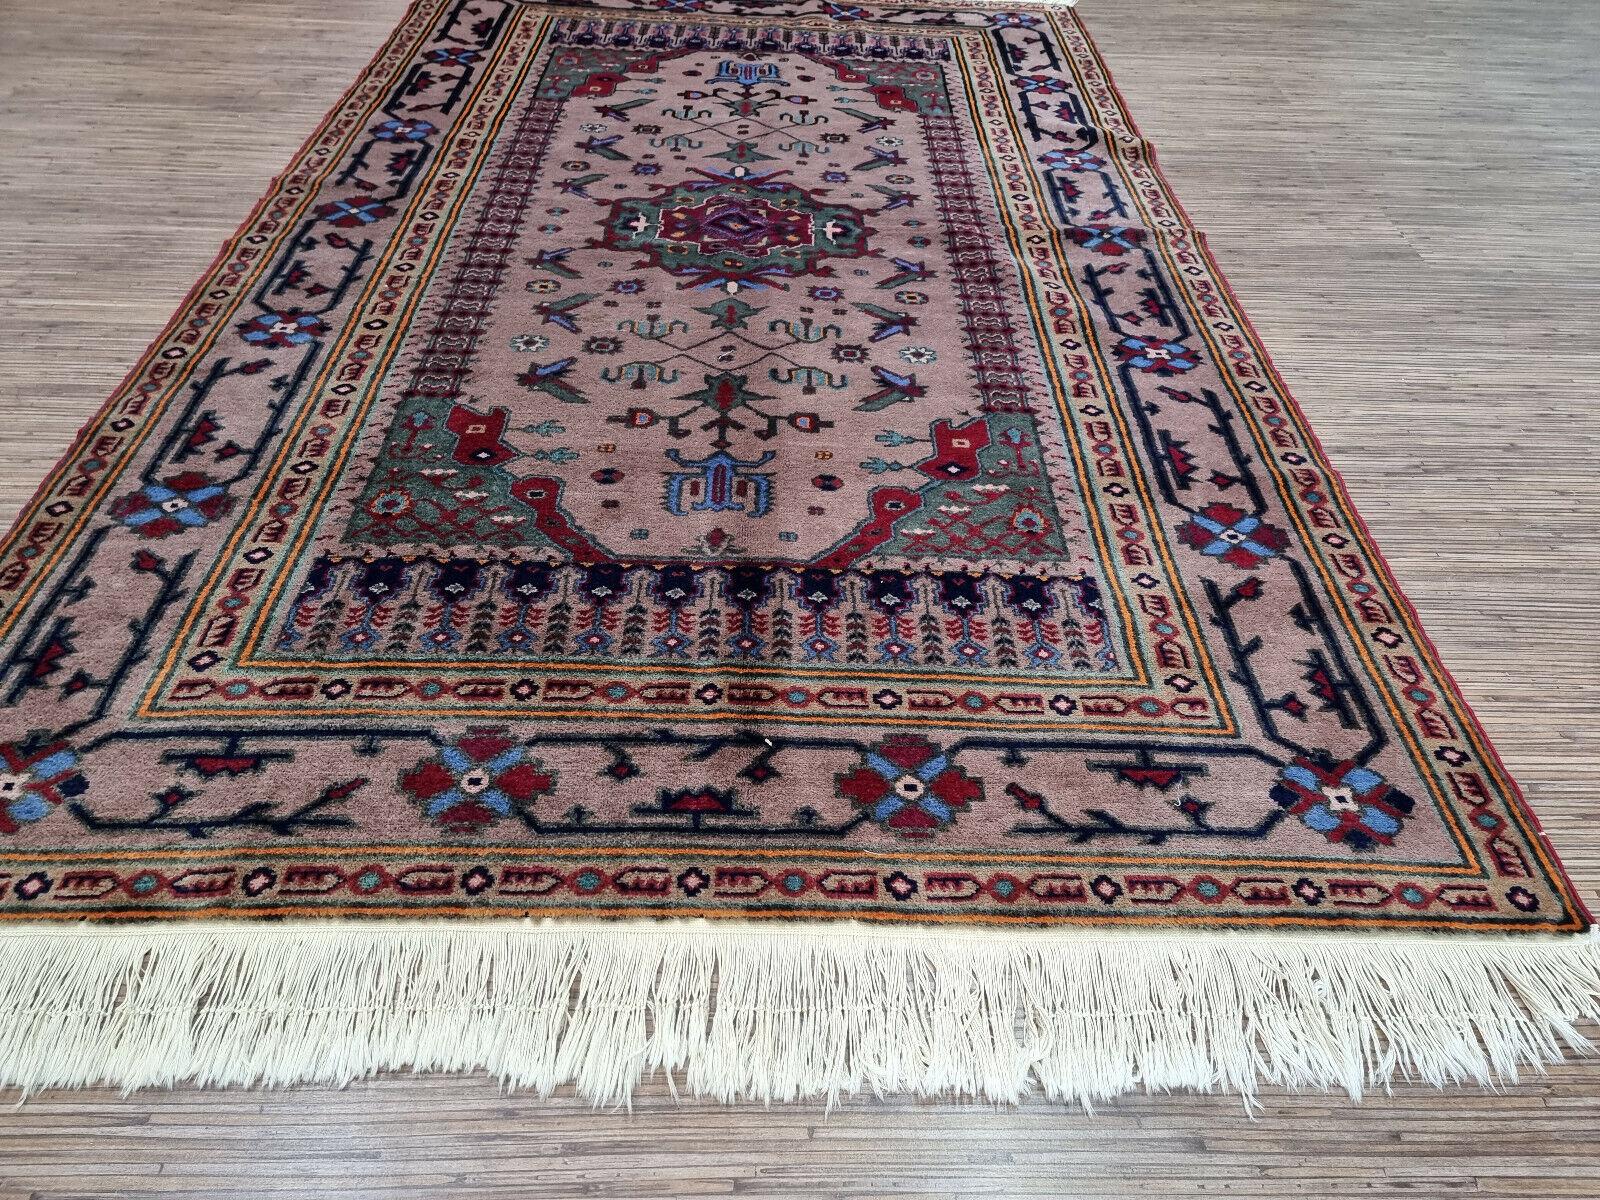 Hand-Knotted Handmade Vintage Caucasian Shirvan Rug 4' x 6.6', 1960s - 1D76